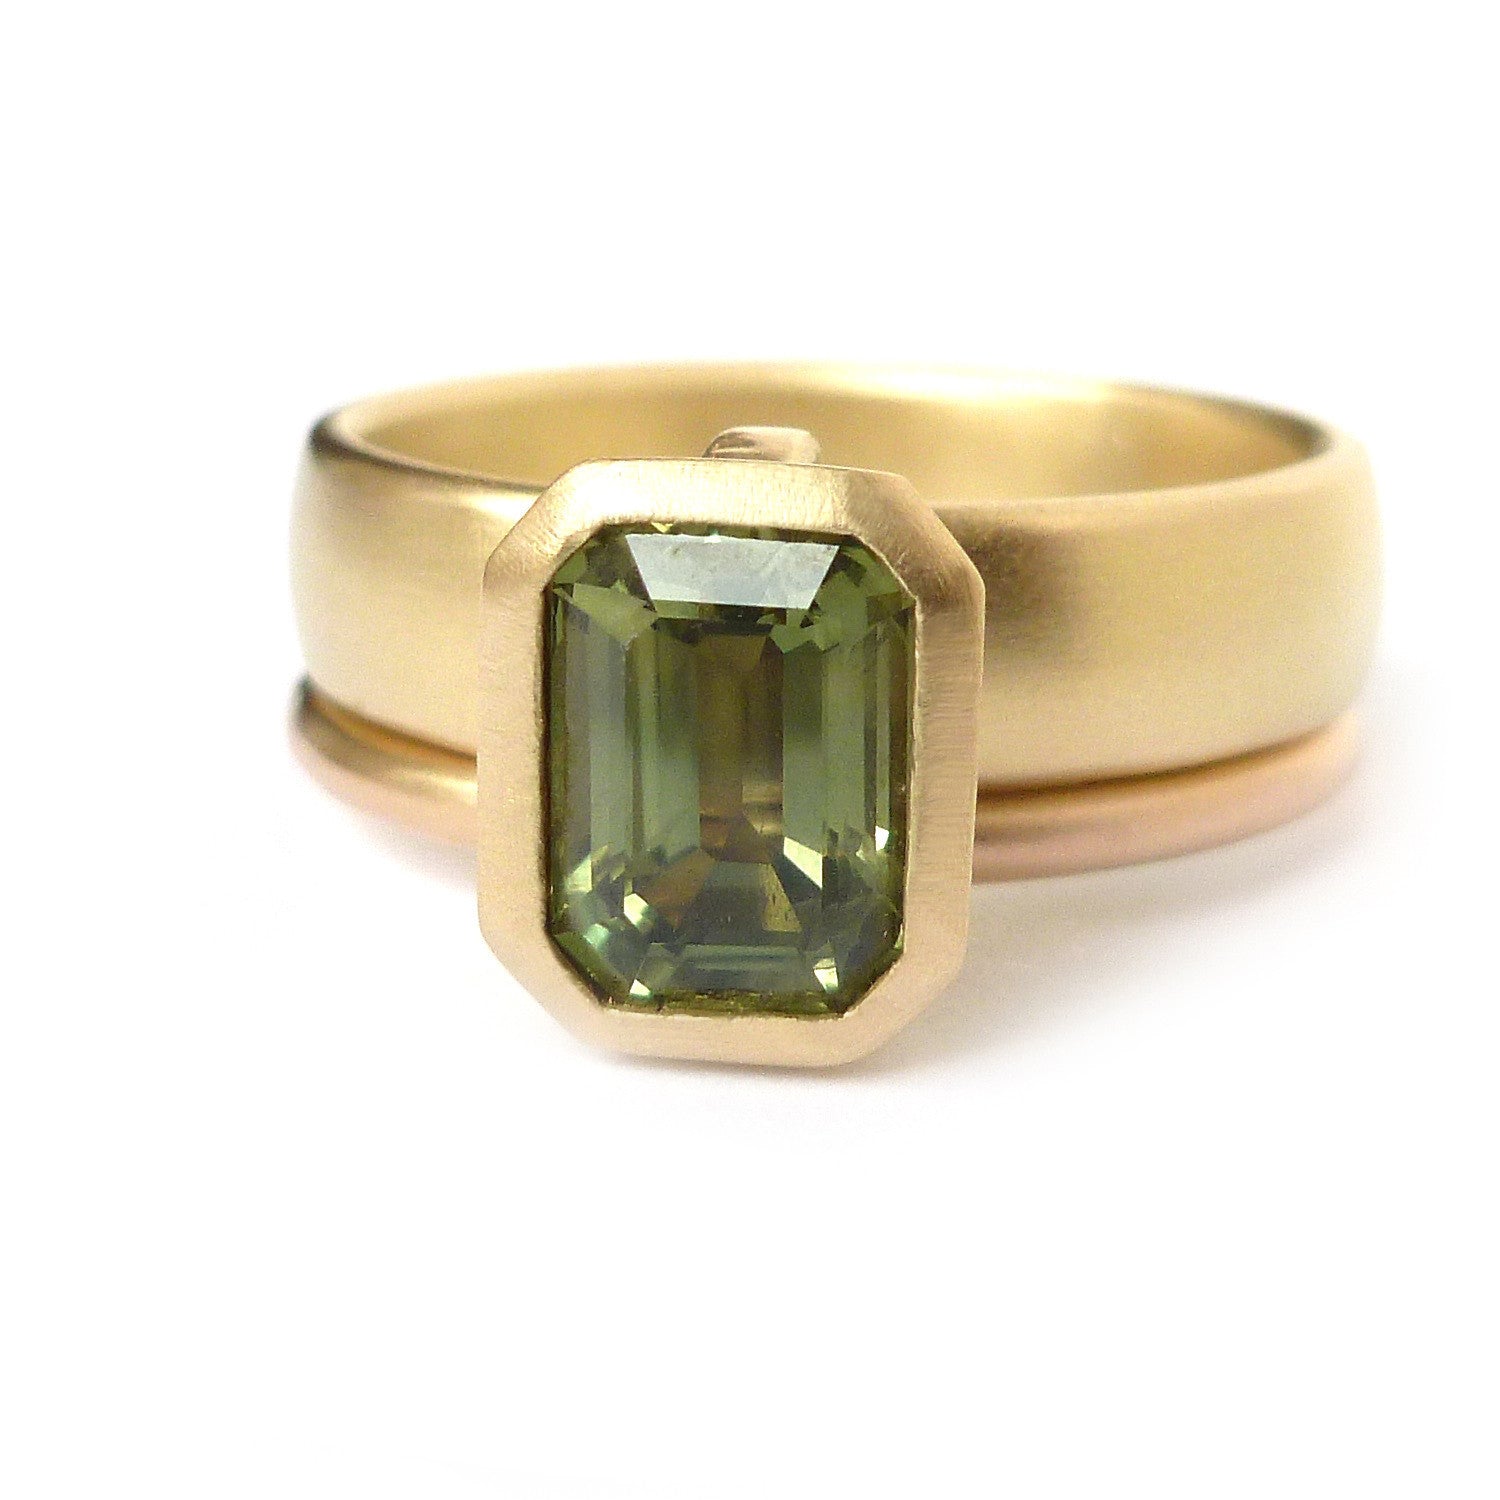 Unique, modern and contemporary two band ring,with a green sapphire. Perfect for a alternative wedding and engagement ring. Handmade in UK by designer Sue Lane.